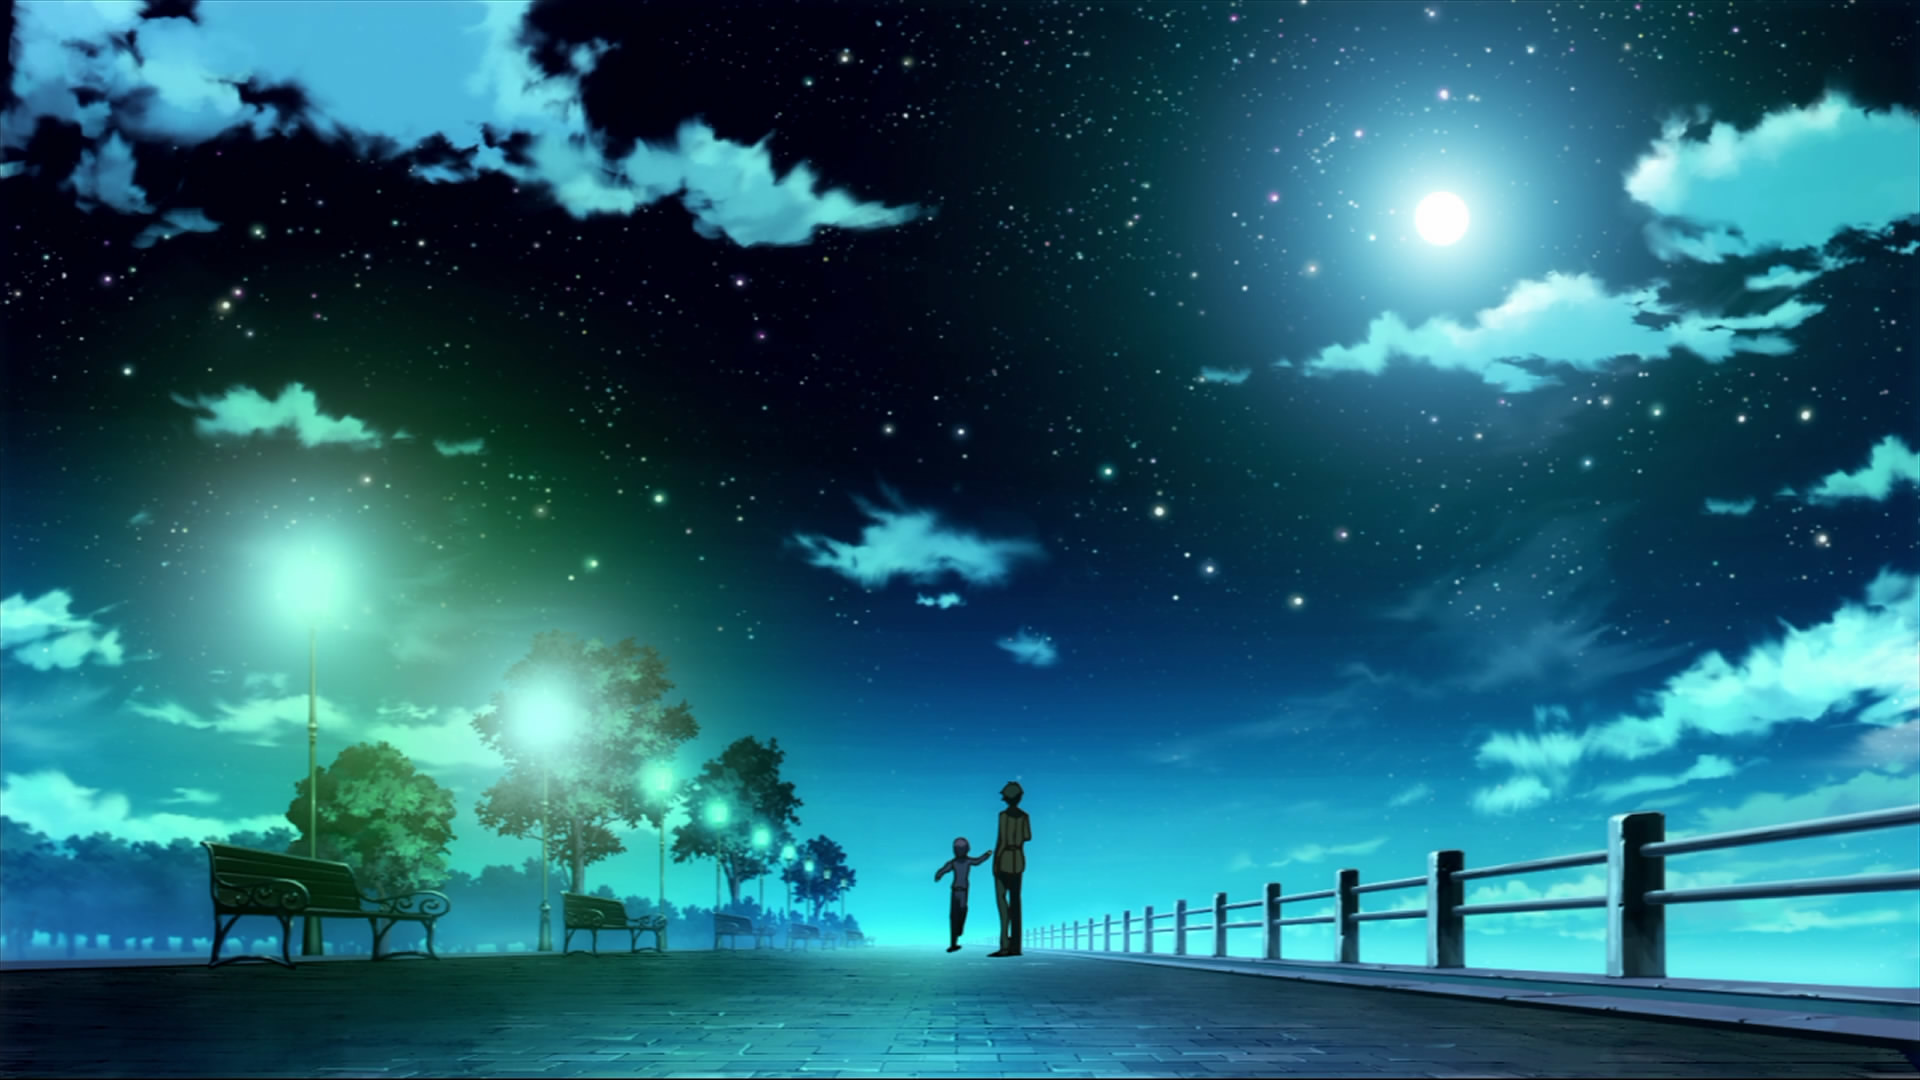 Search Results for “anime night sky wallpaper hd” – Adorable Wallpapers